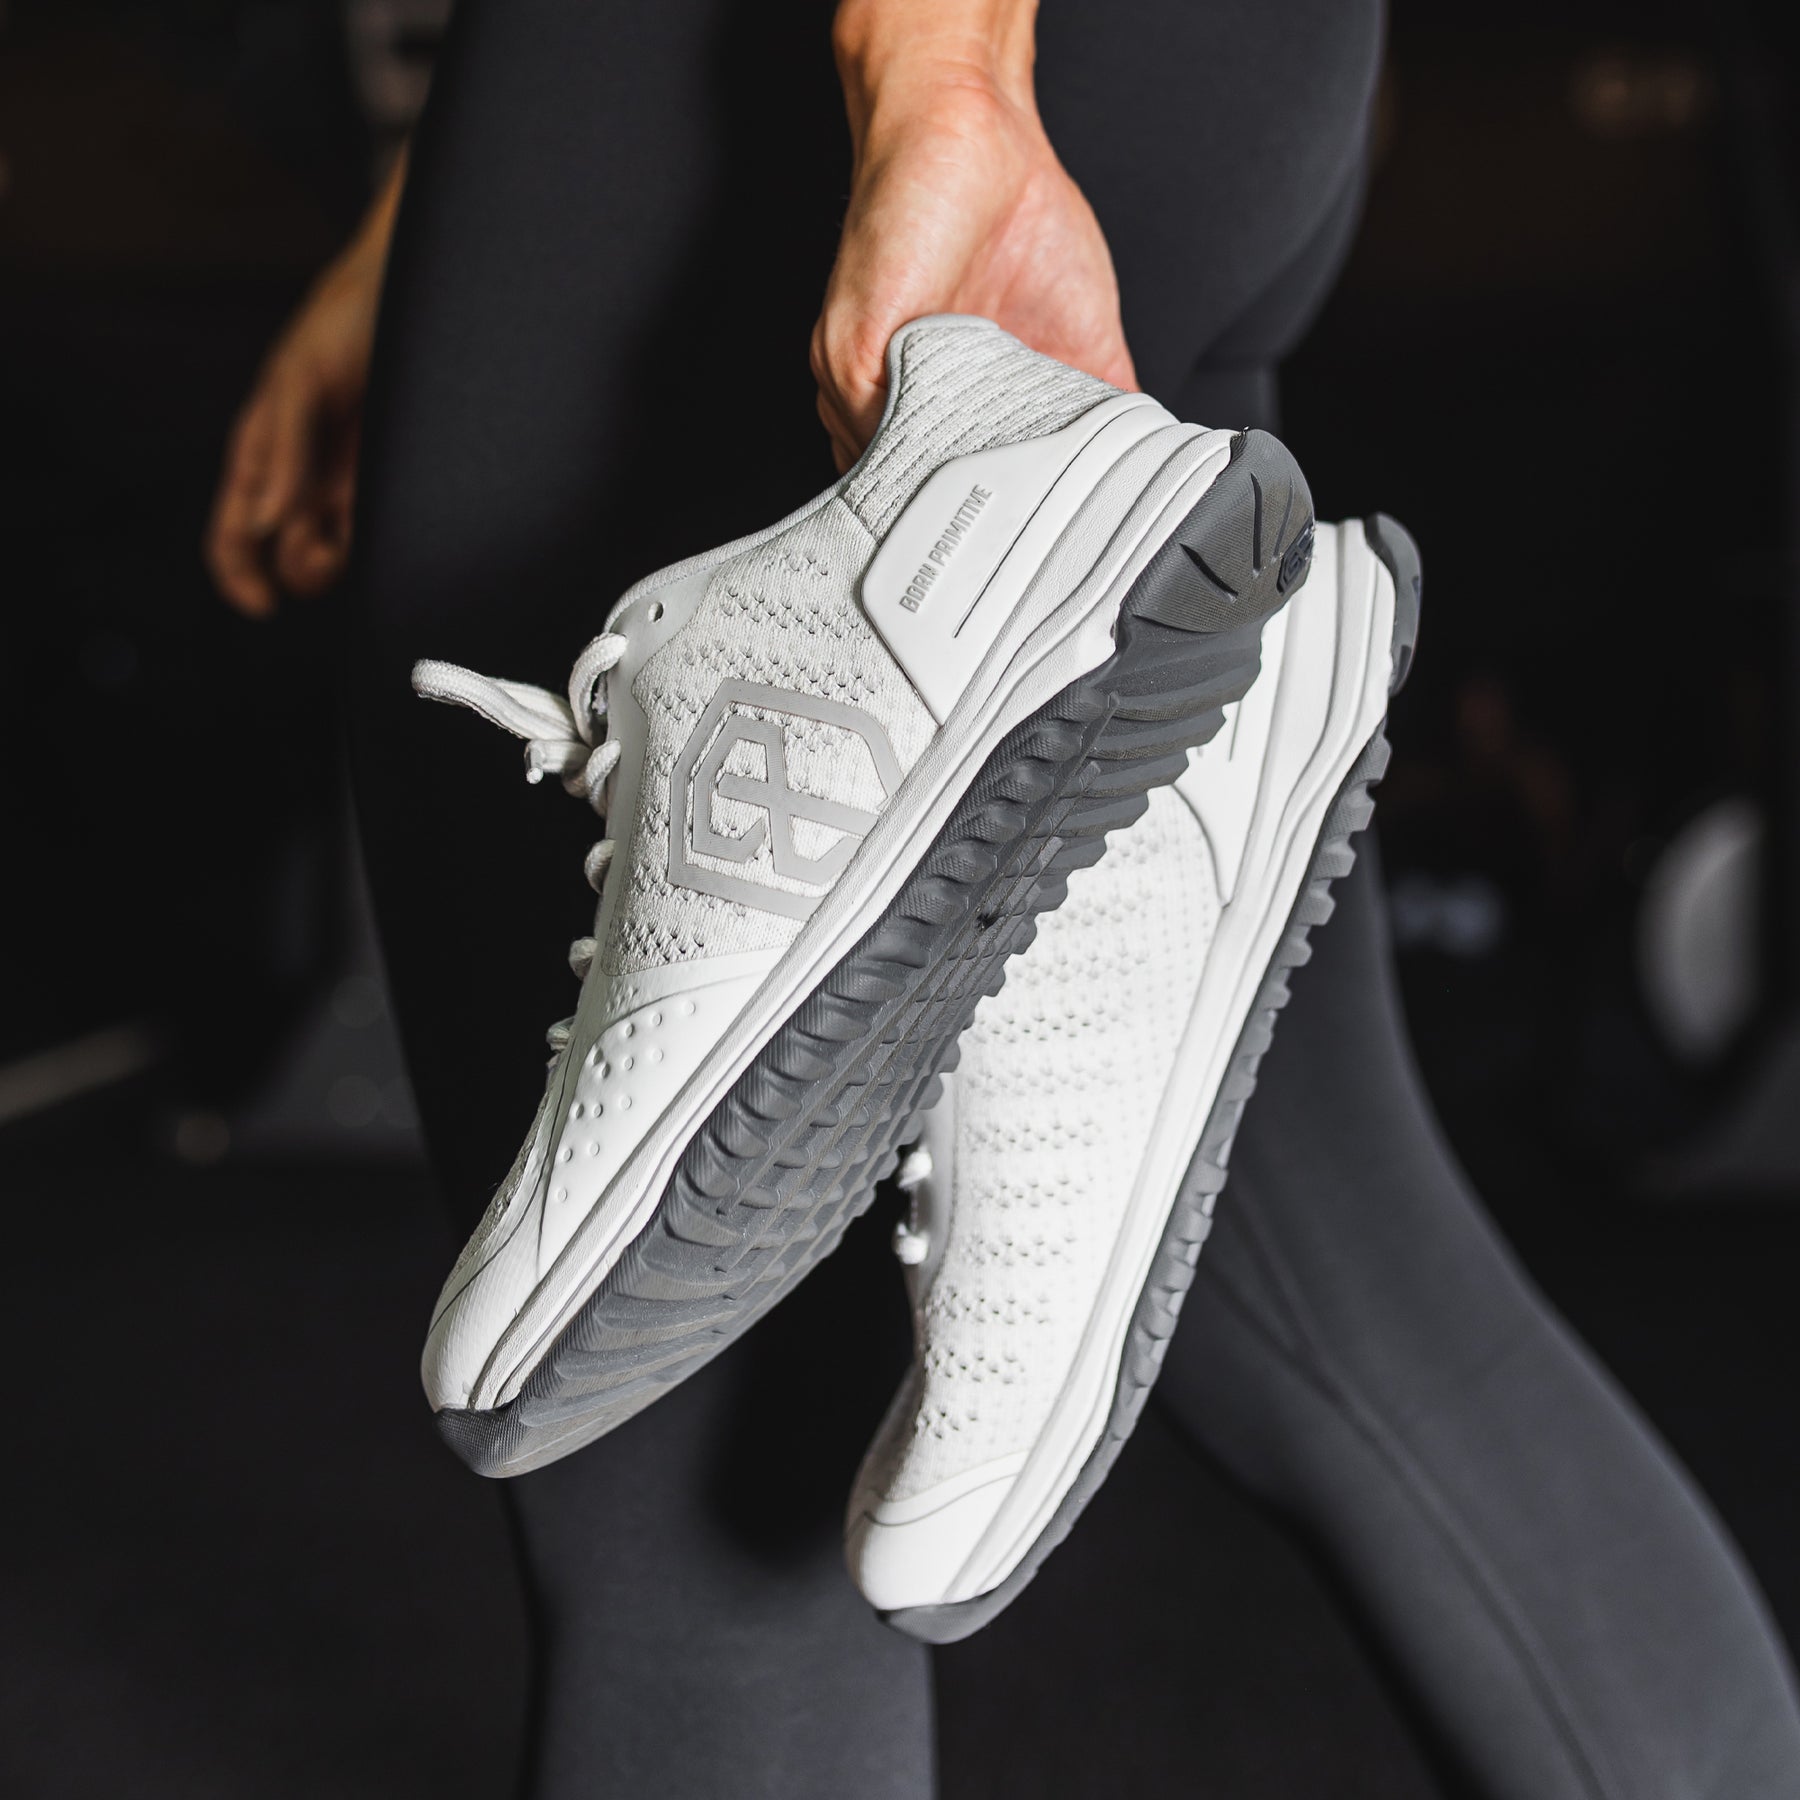 Women's White and Grey Workout Trainers